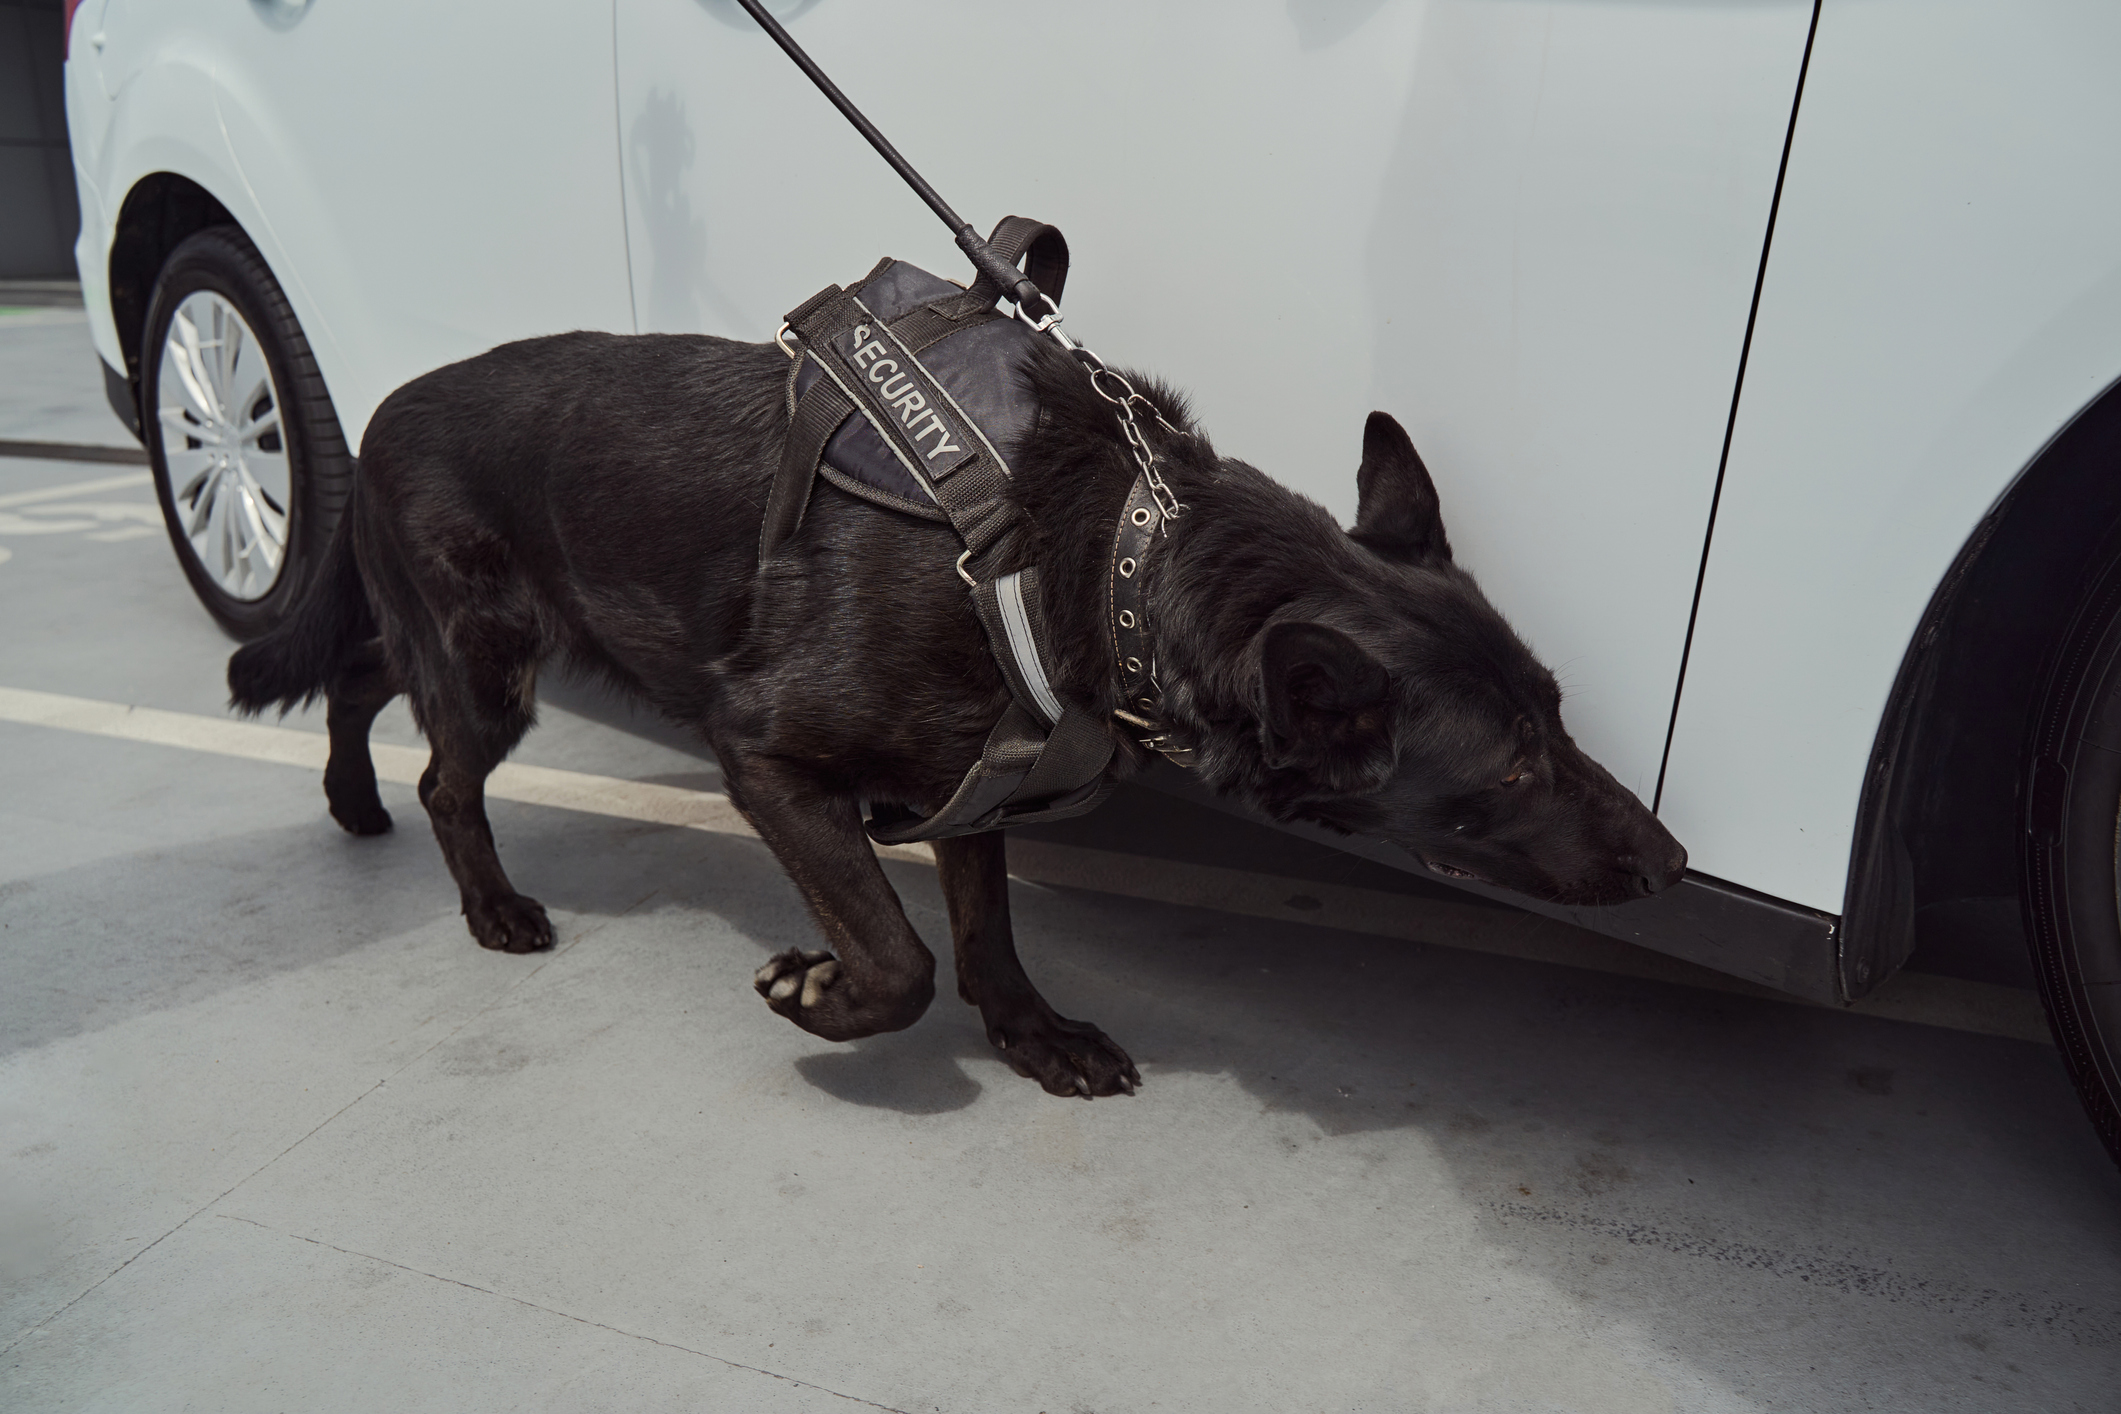 Crossing the line: When do drug dogs need search warrants?